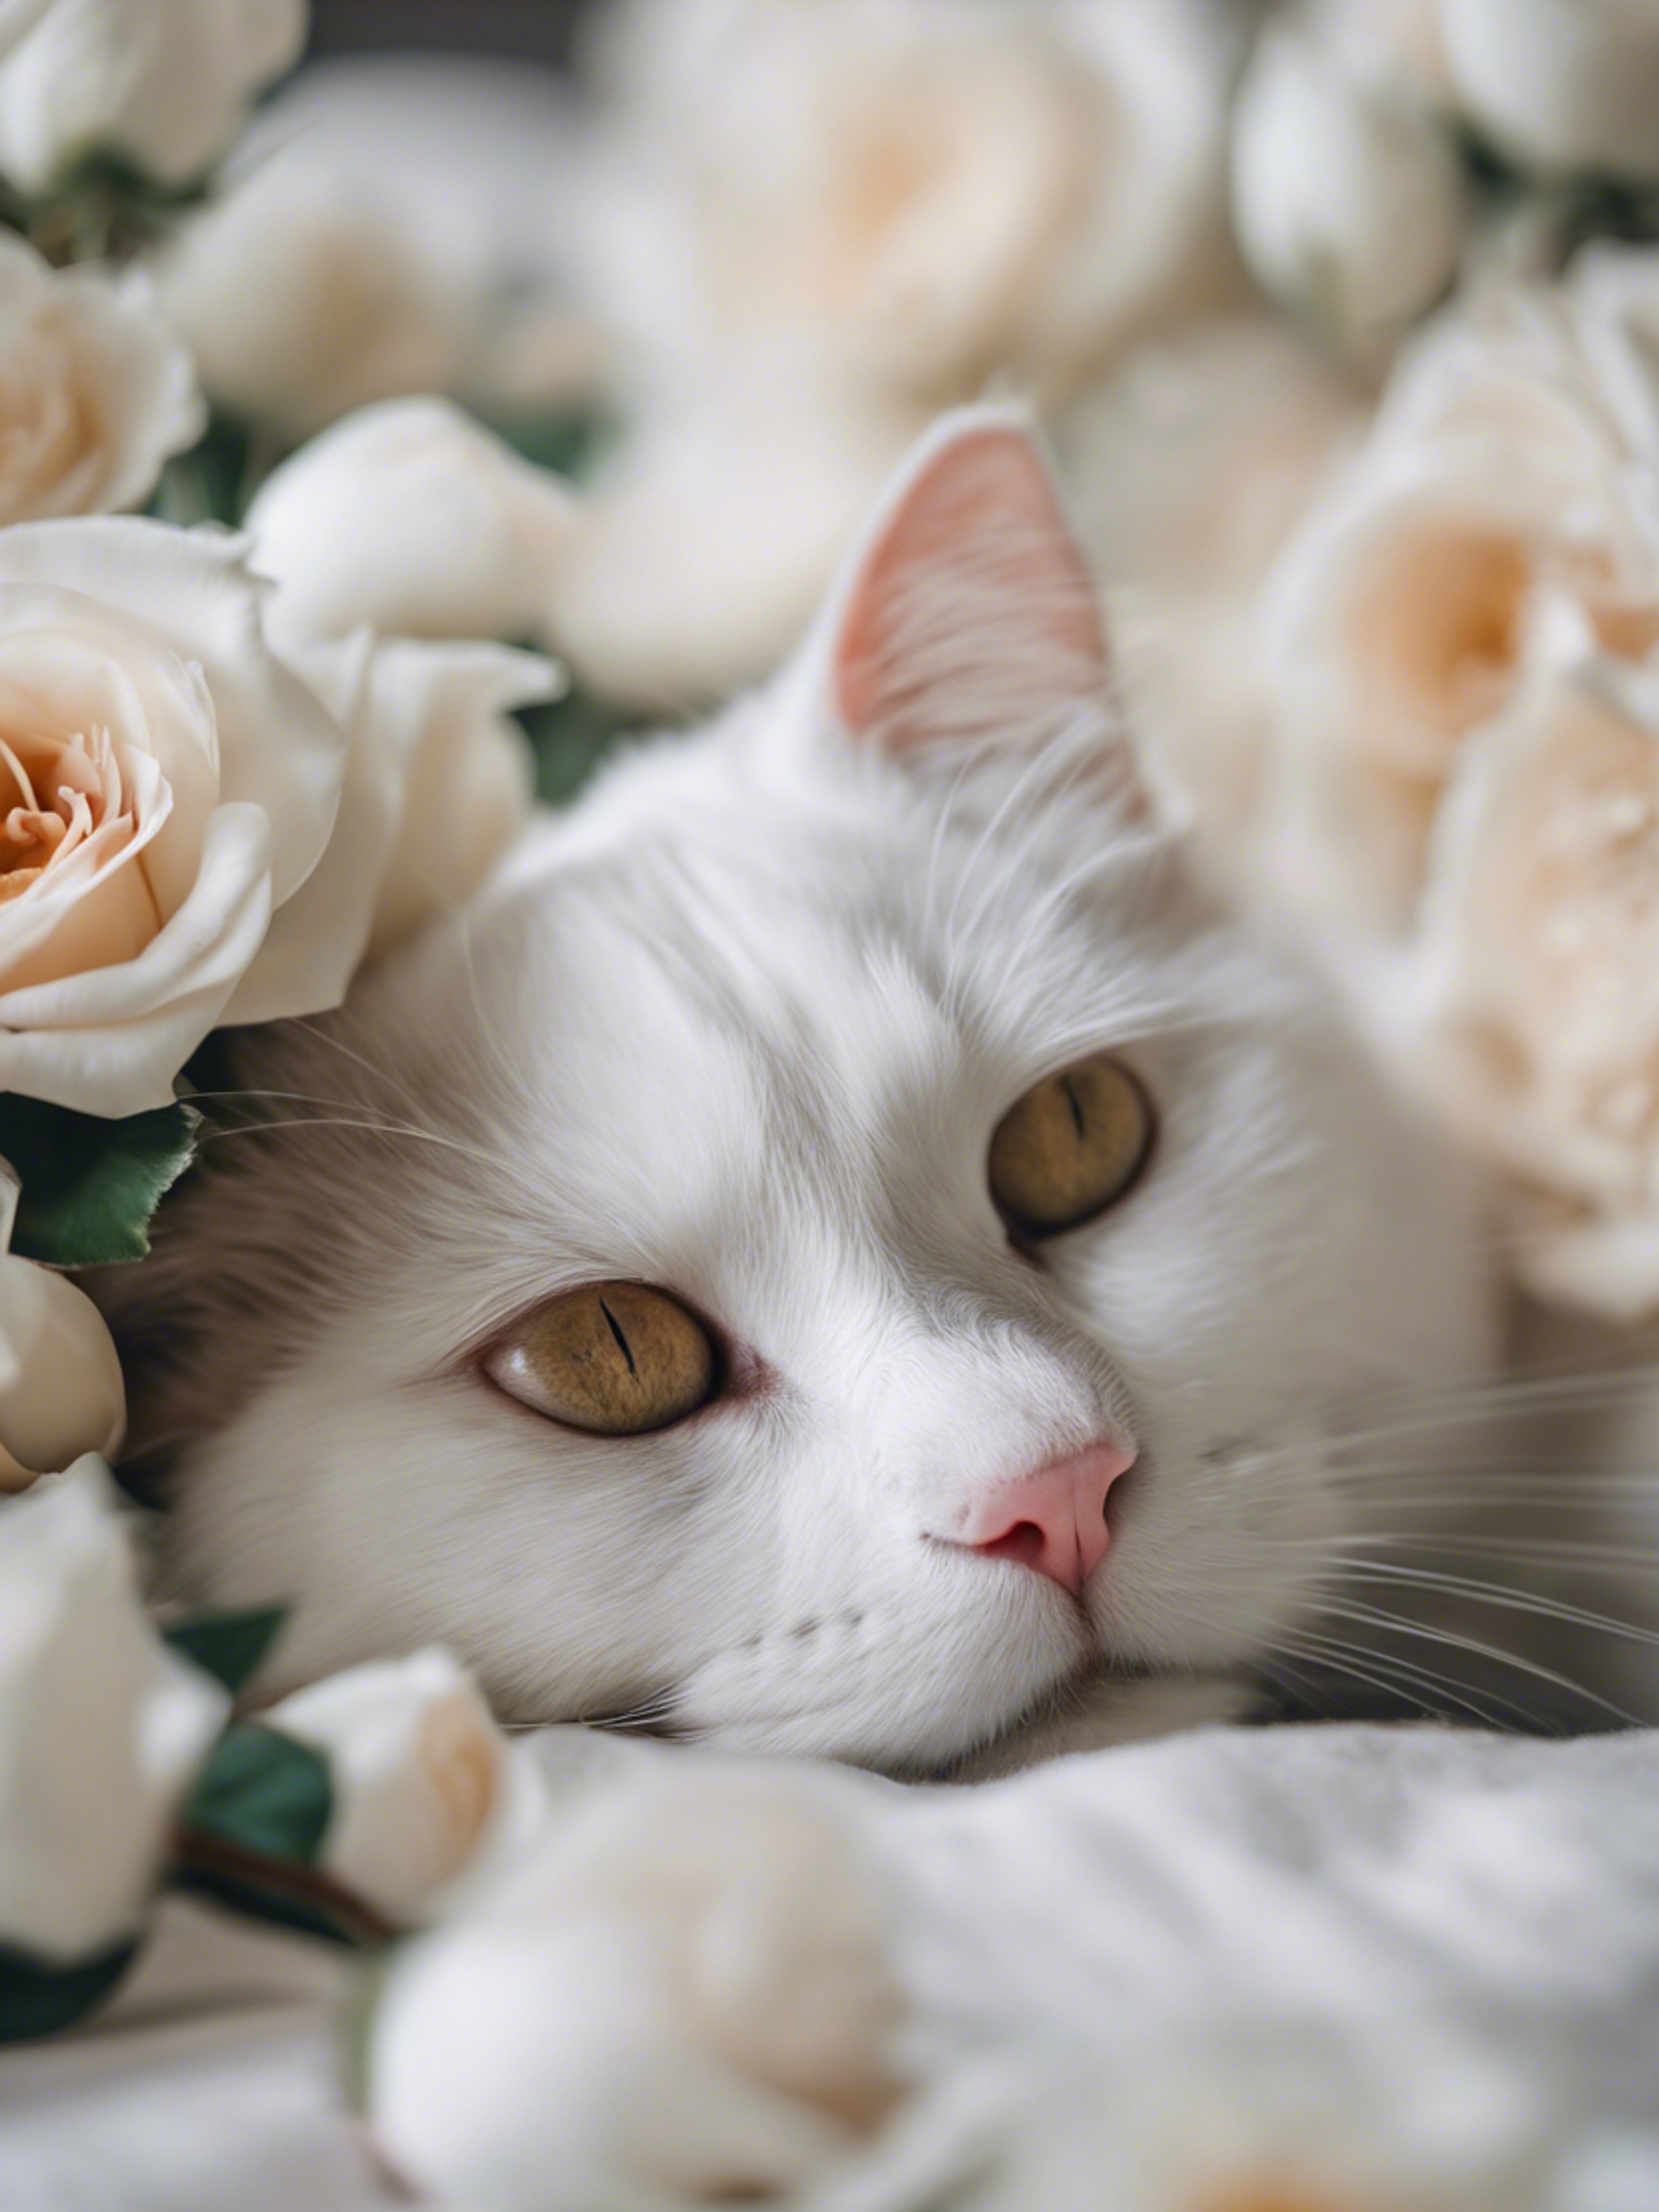 A picturesque content white cat sleeping amidst a bed of white roses.壁紙[21bd514b84c74c92a754]